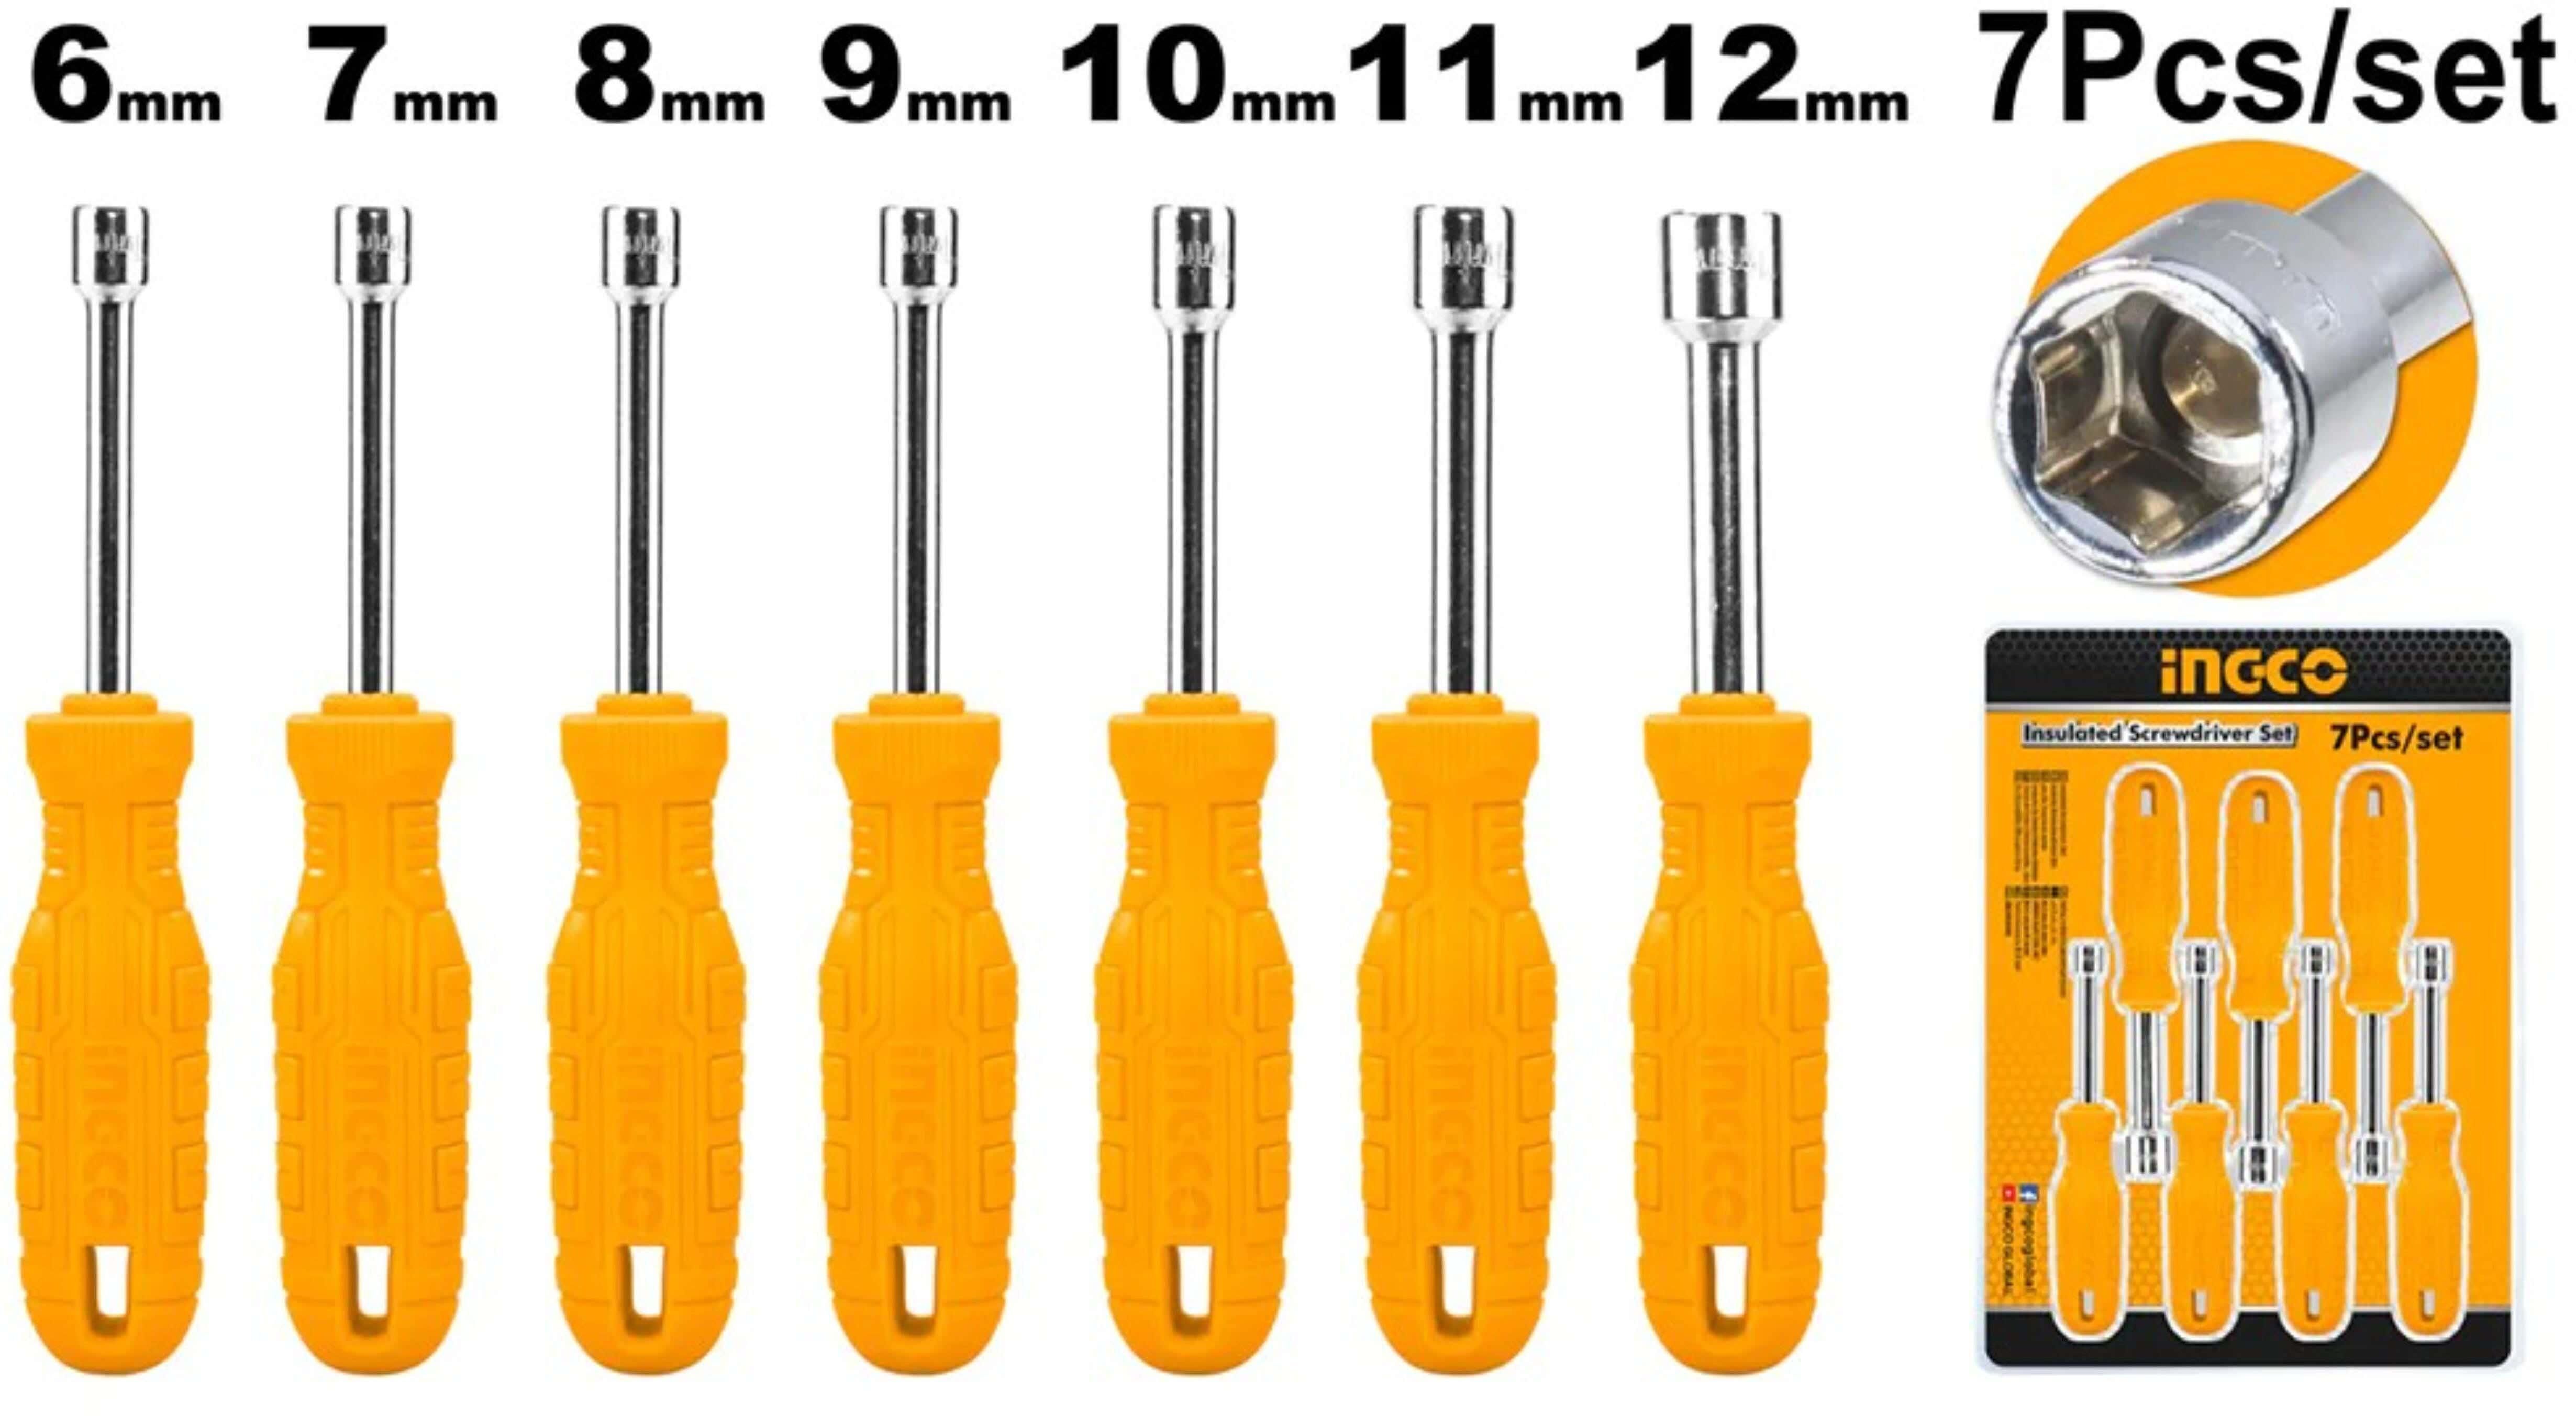 Get Ingco Hknsd0701 Nut Screwdriver Set, 7 Pieces - Yellow with best offers | Raneen.com